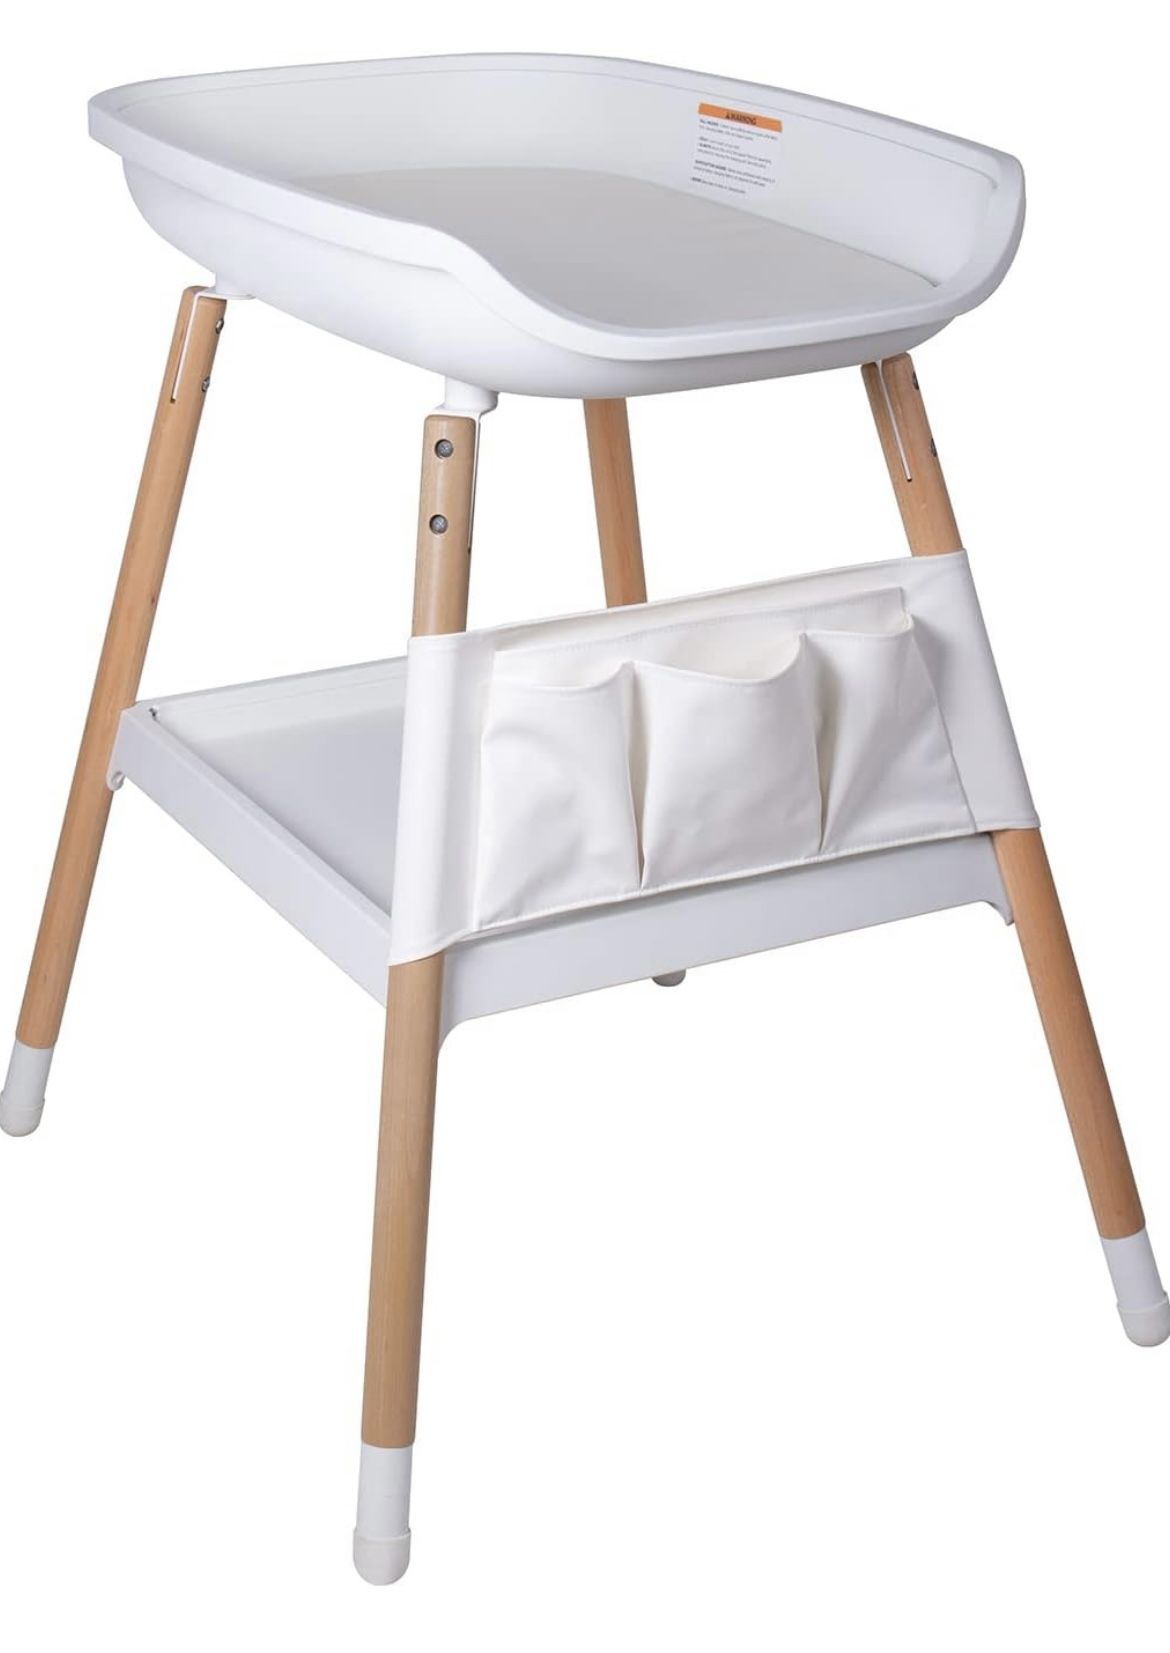 Modern Diaper Changing Table 100